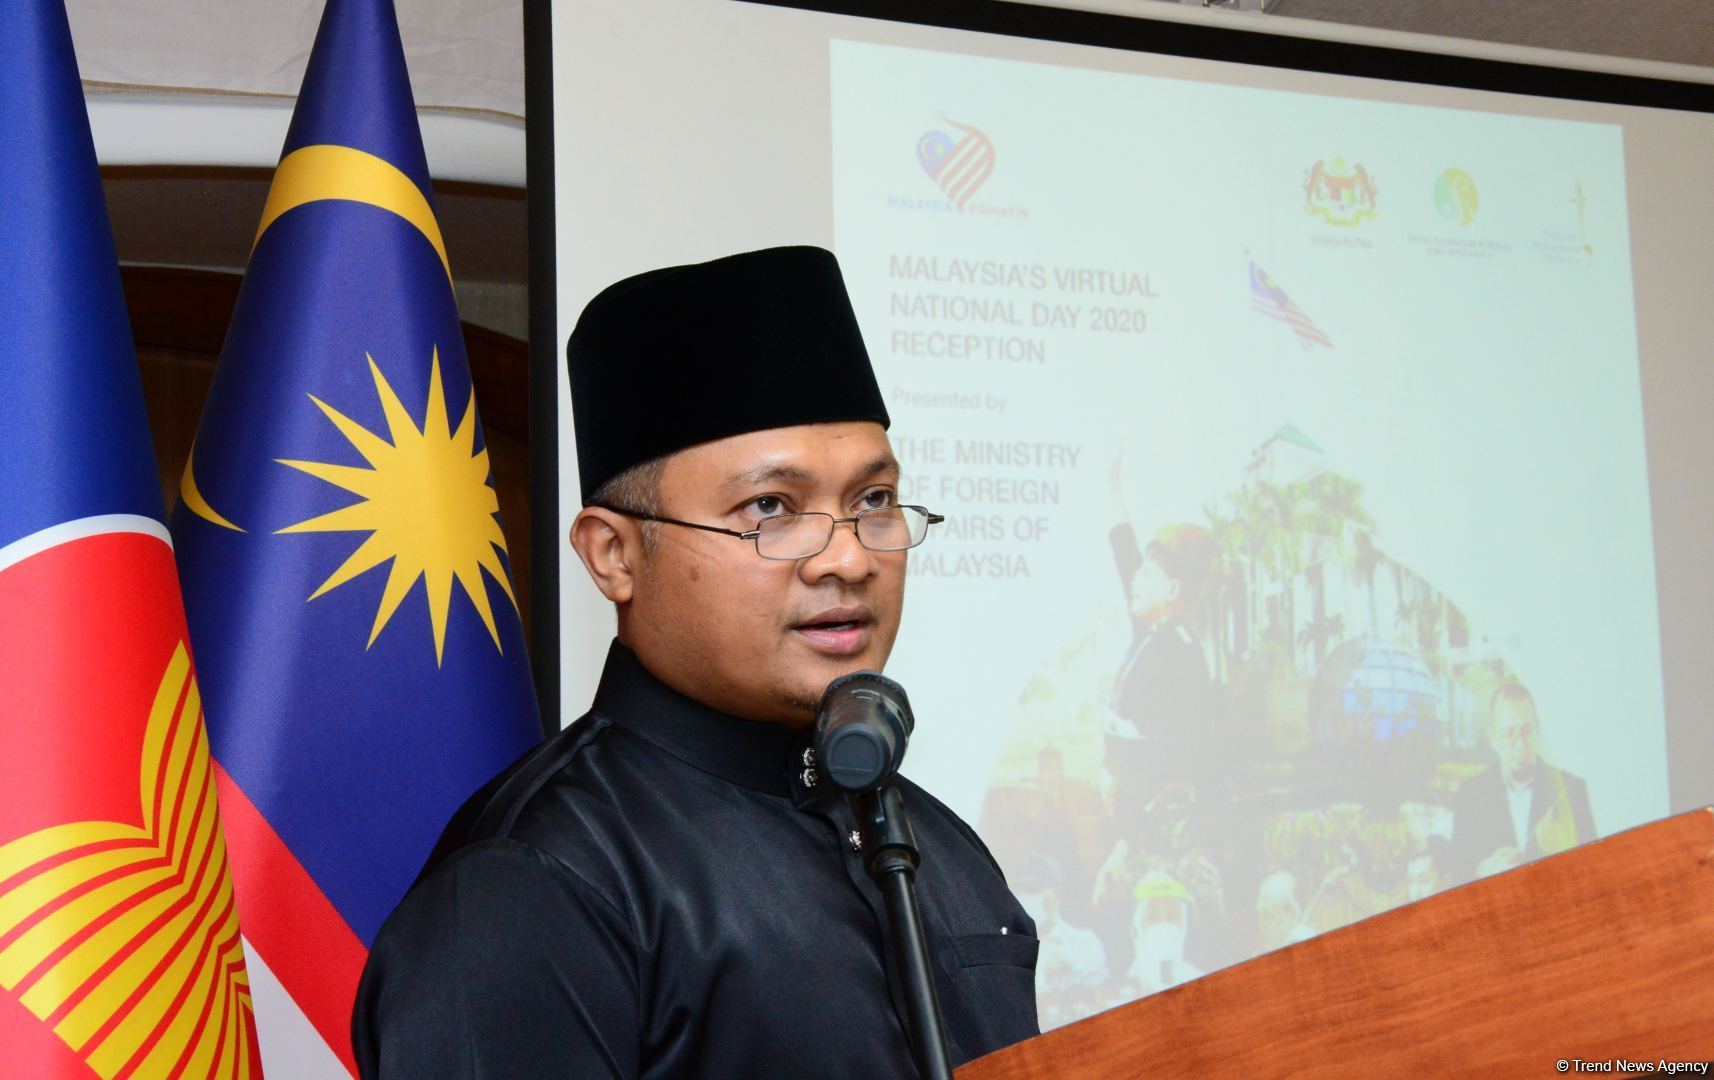 Ambassador: Malaysia, Azerbaijan have potential to expand co-op in non-oil sectors